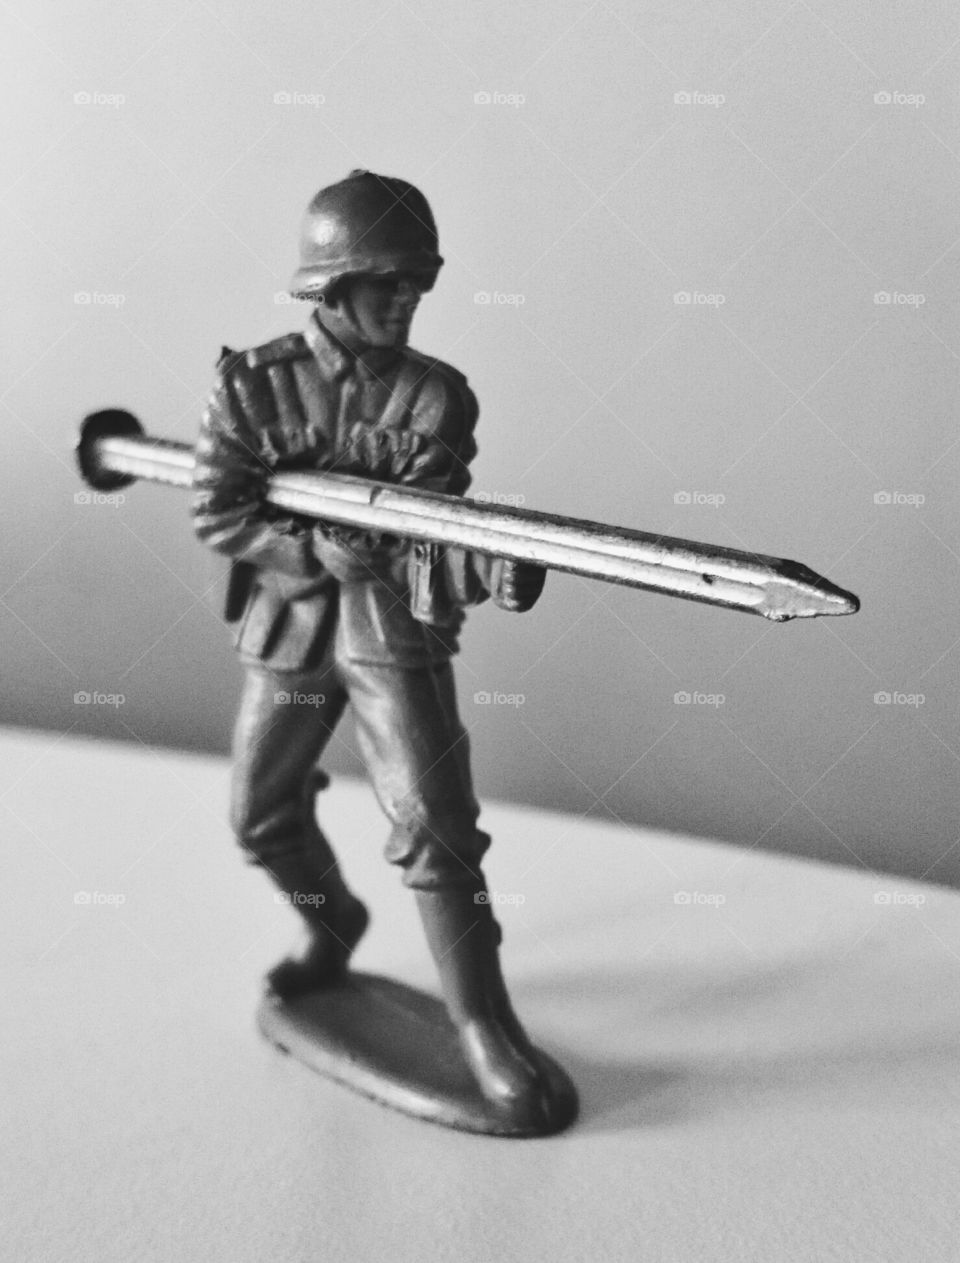 Toy soldier with nail